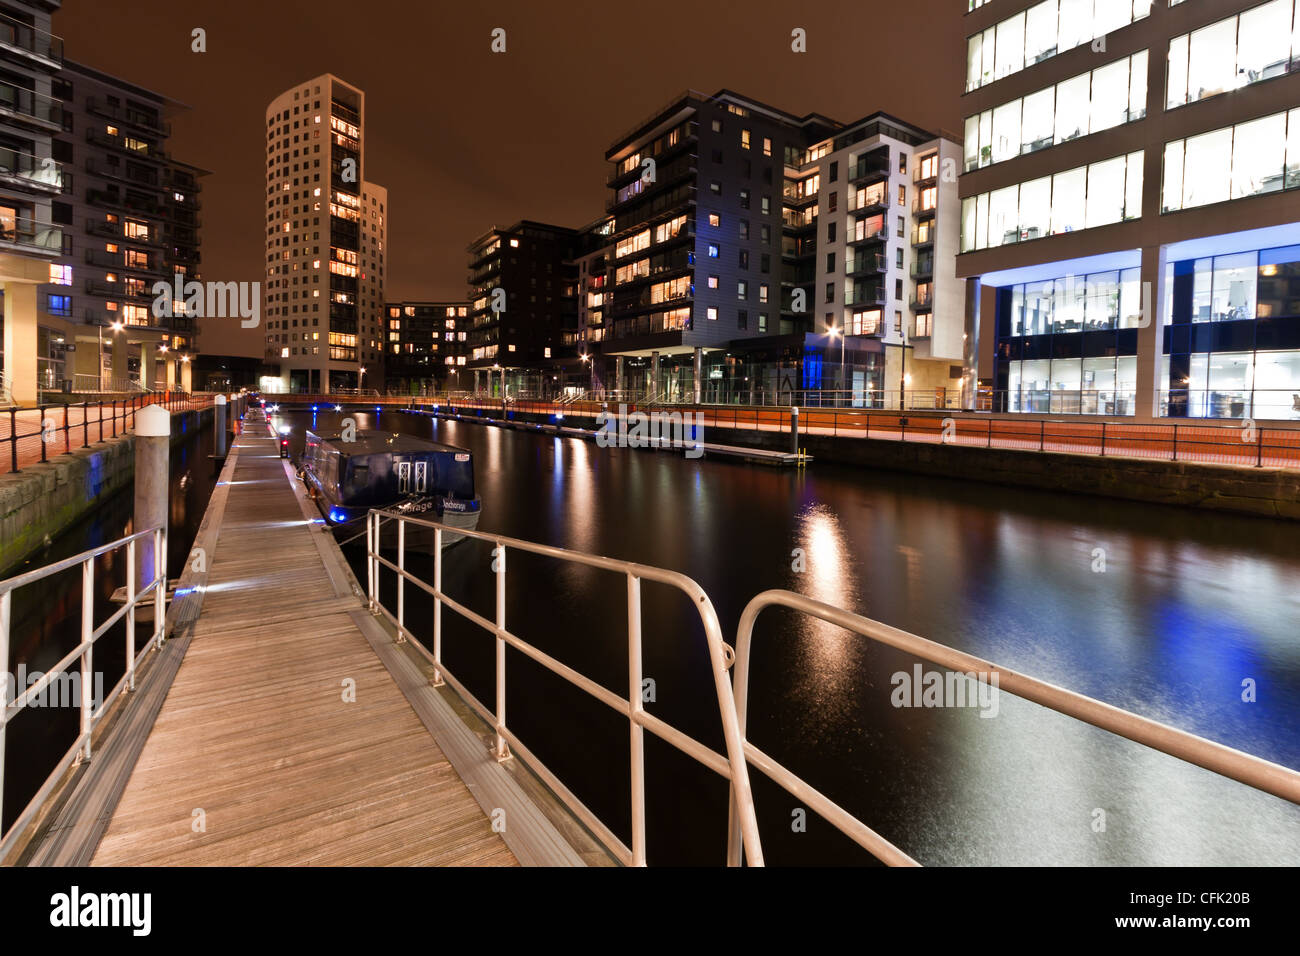 The Royal Armouries after dark, Clarence Dock in Leeds Stock Photo